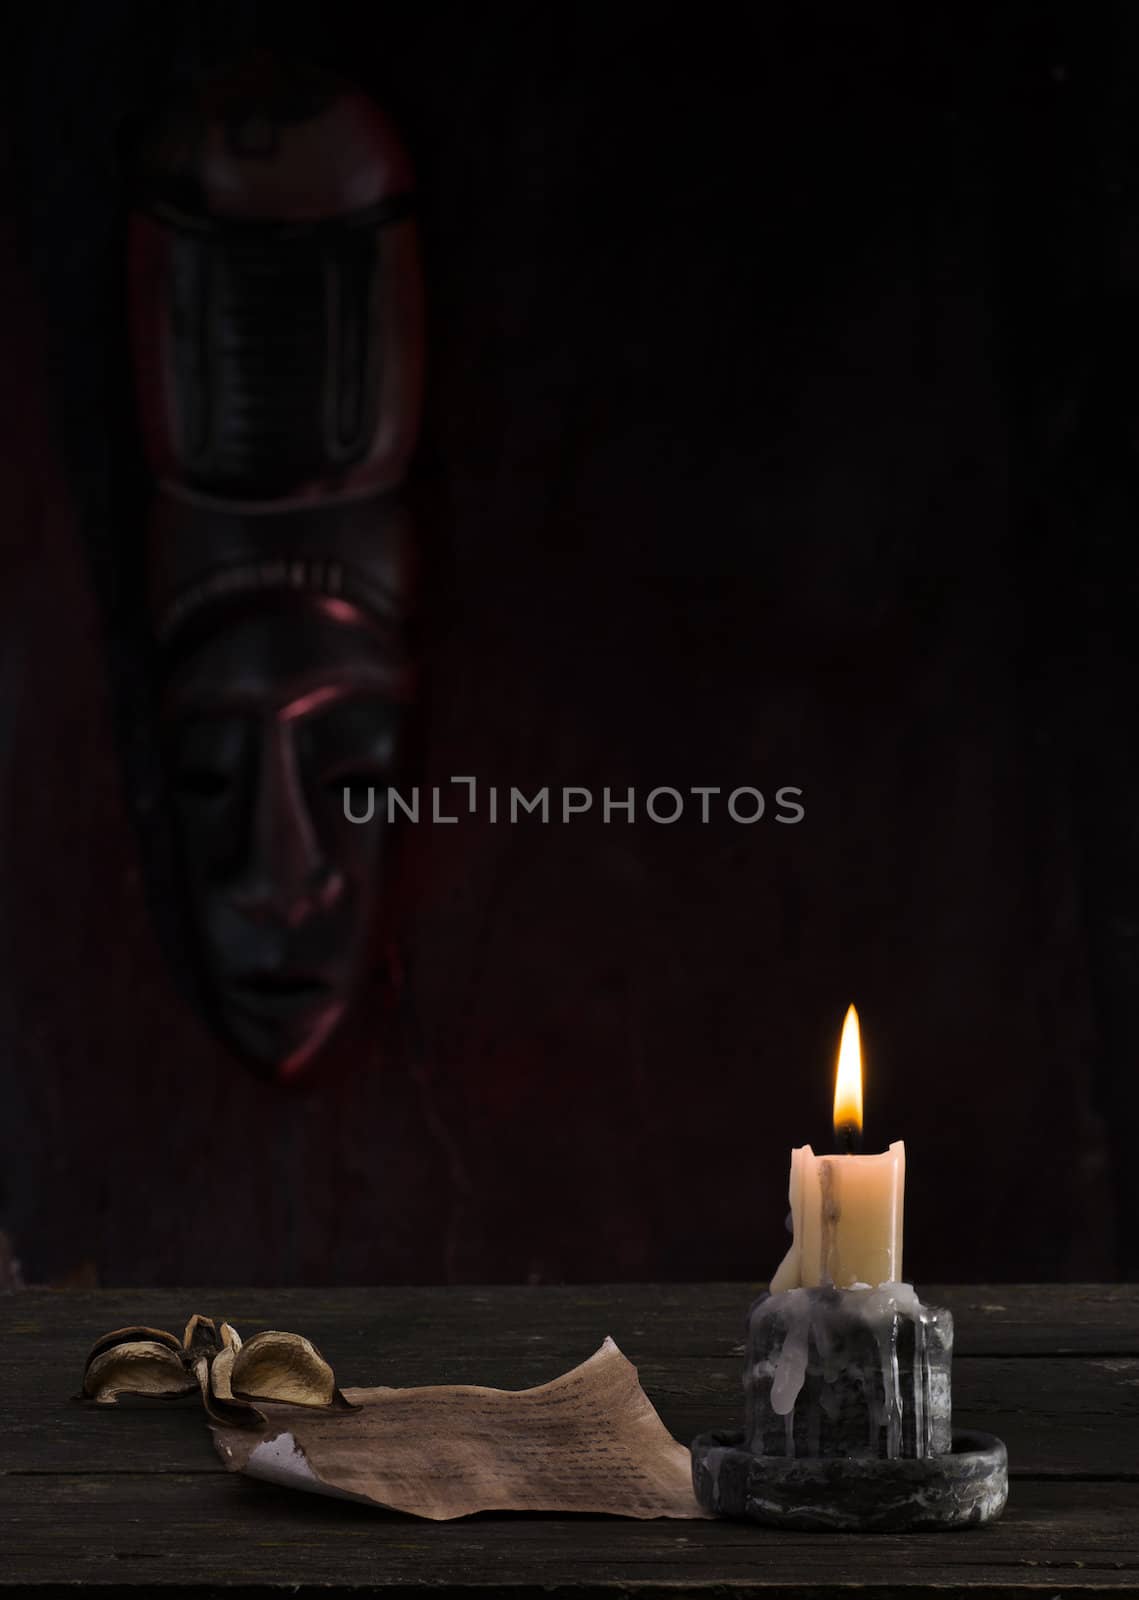 reading a letter by candlelight with an African mask